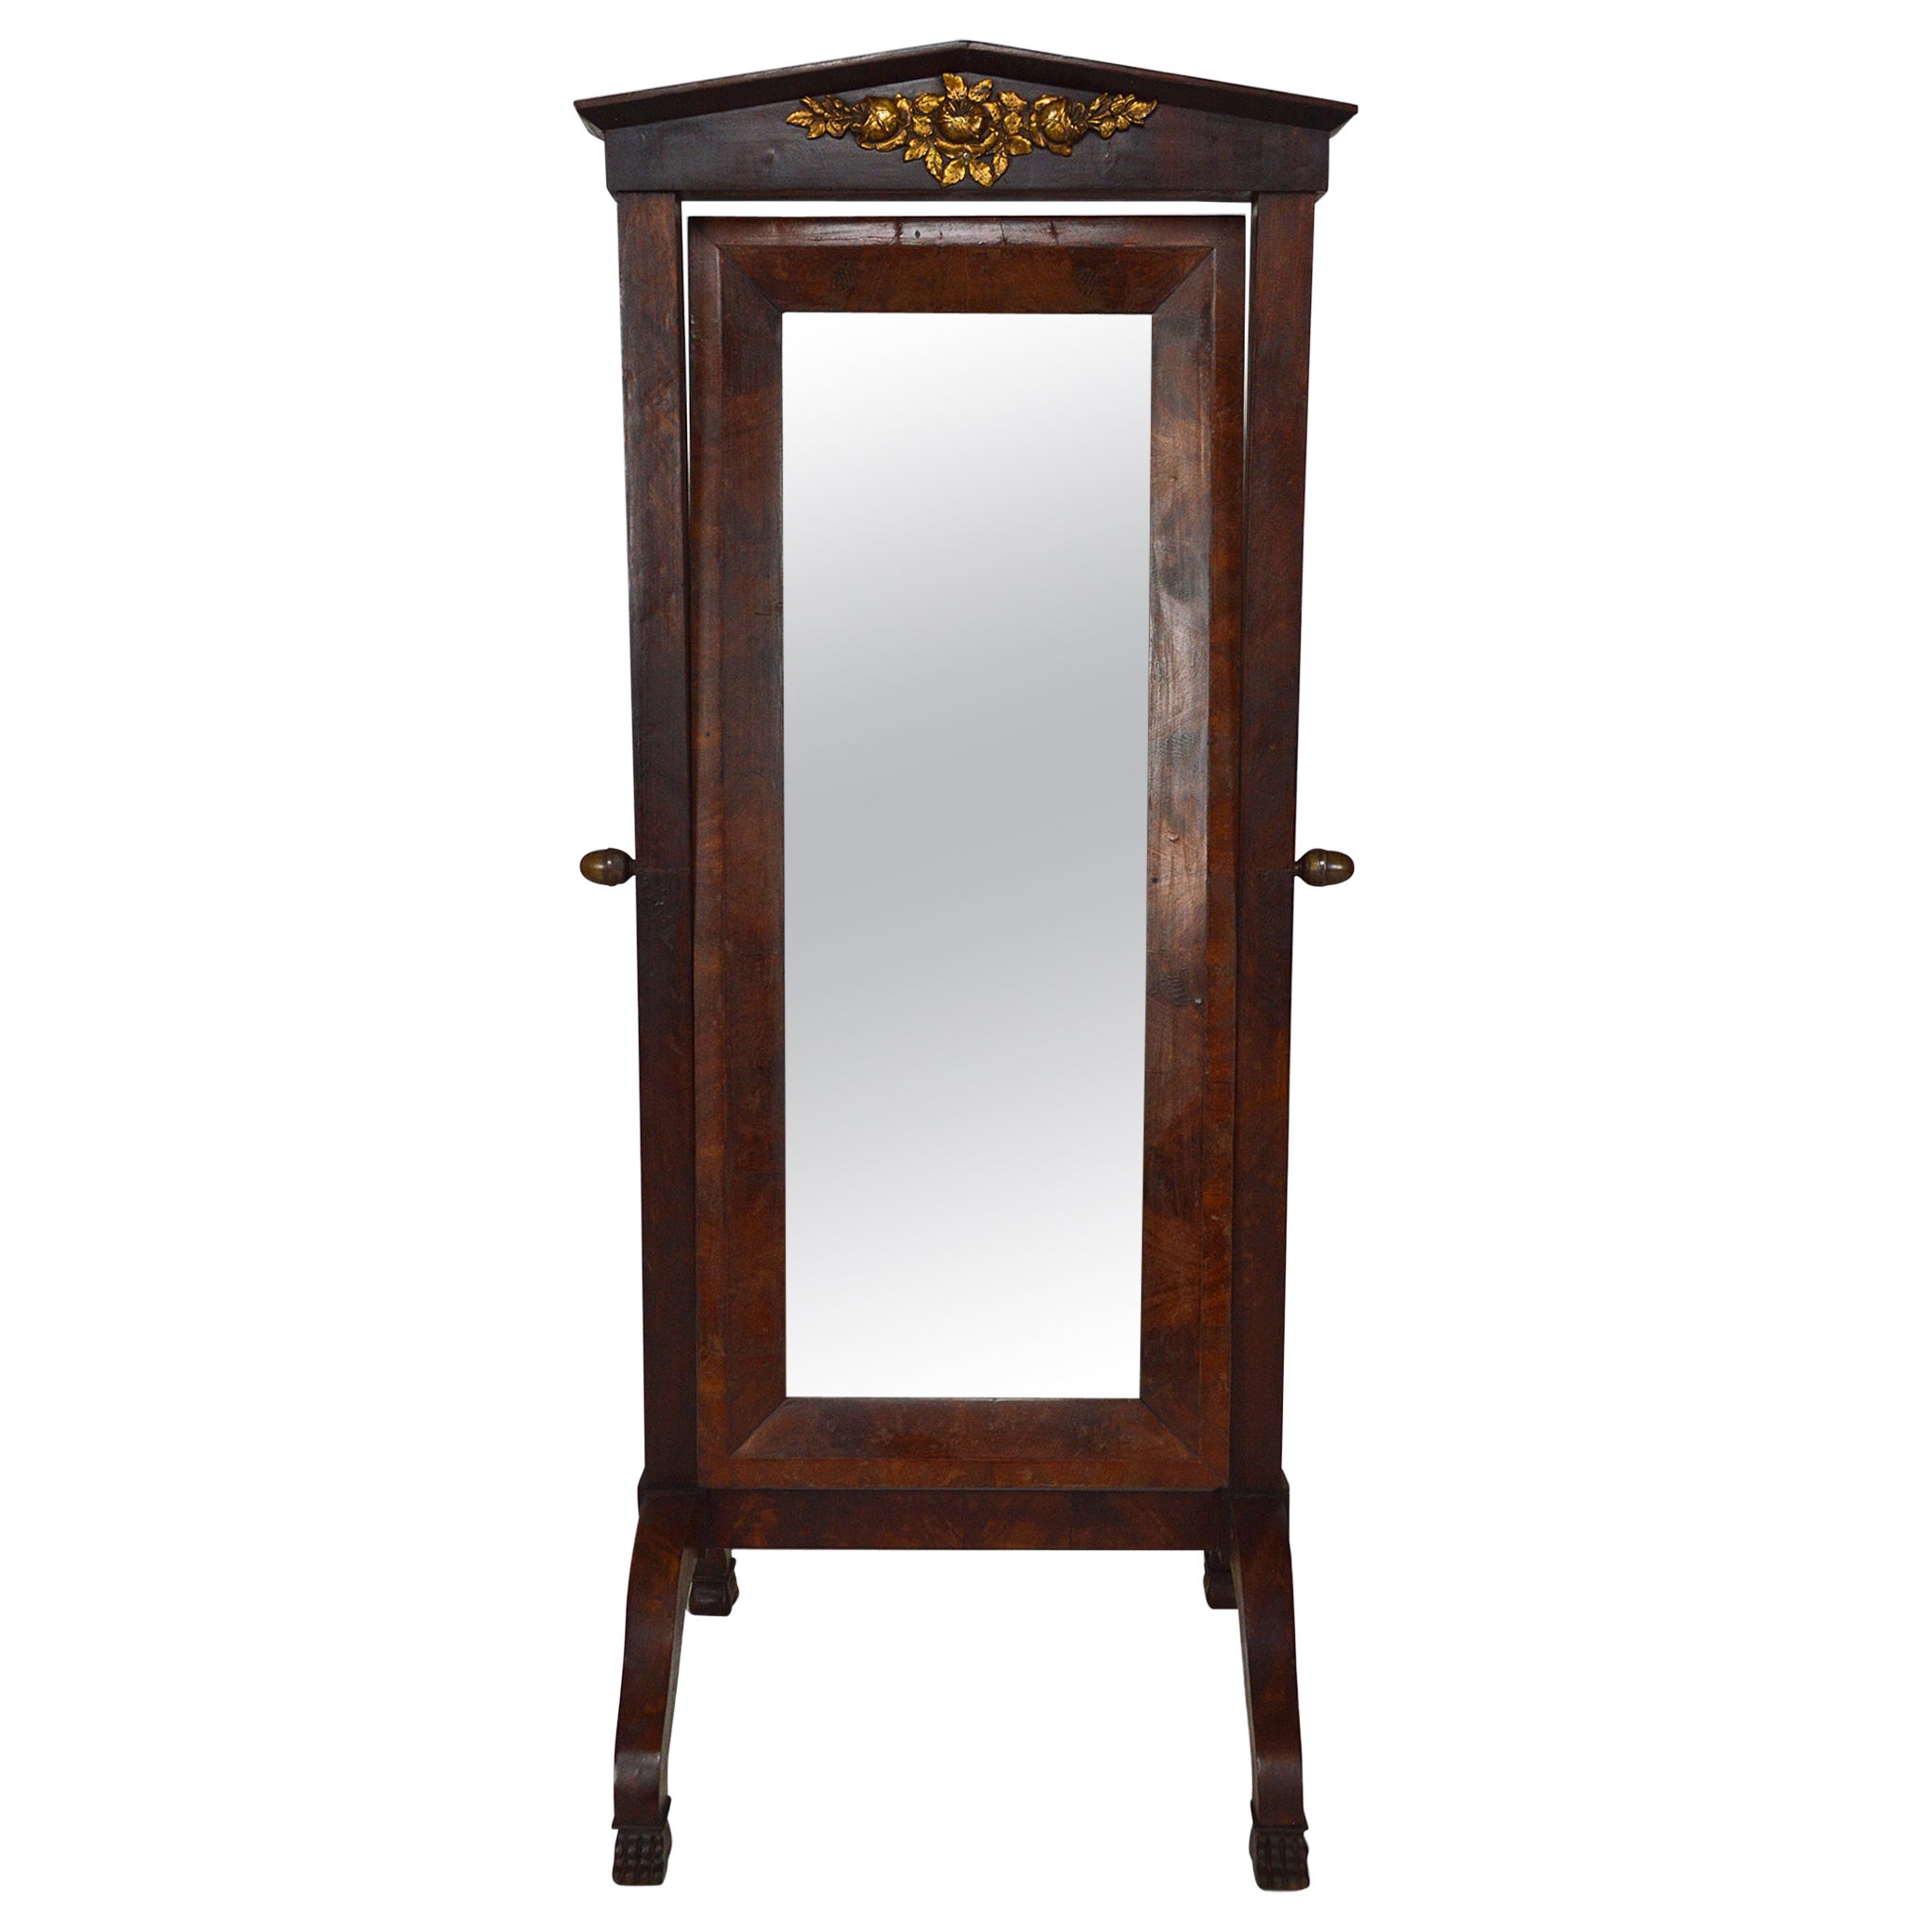 Empire Psyche Mirror in Mahogany, France, early 19th century For Sale